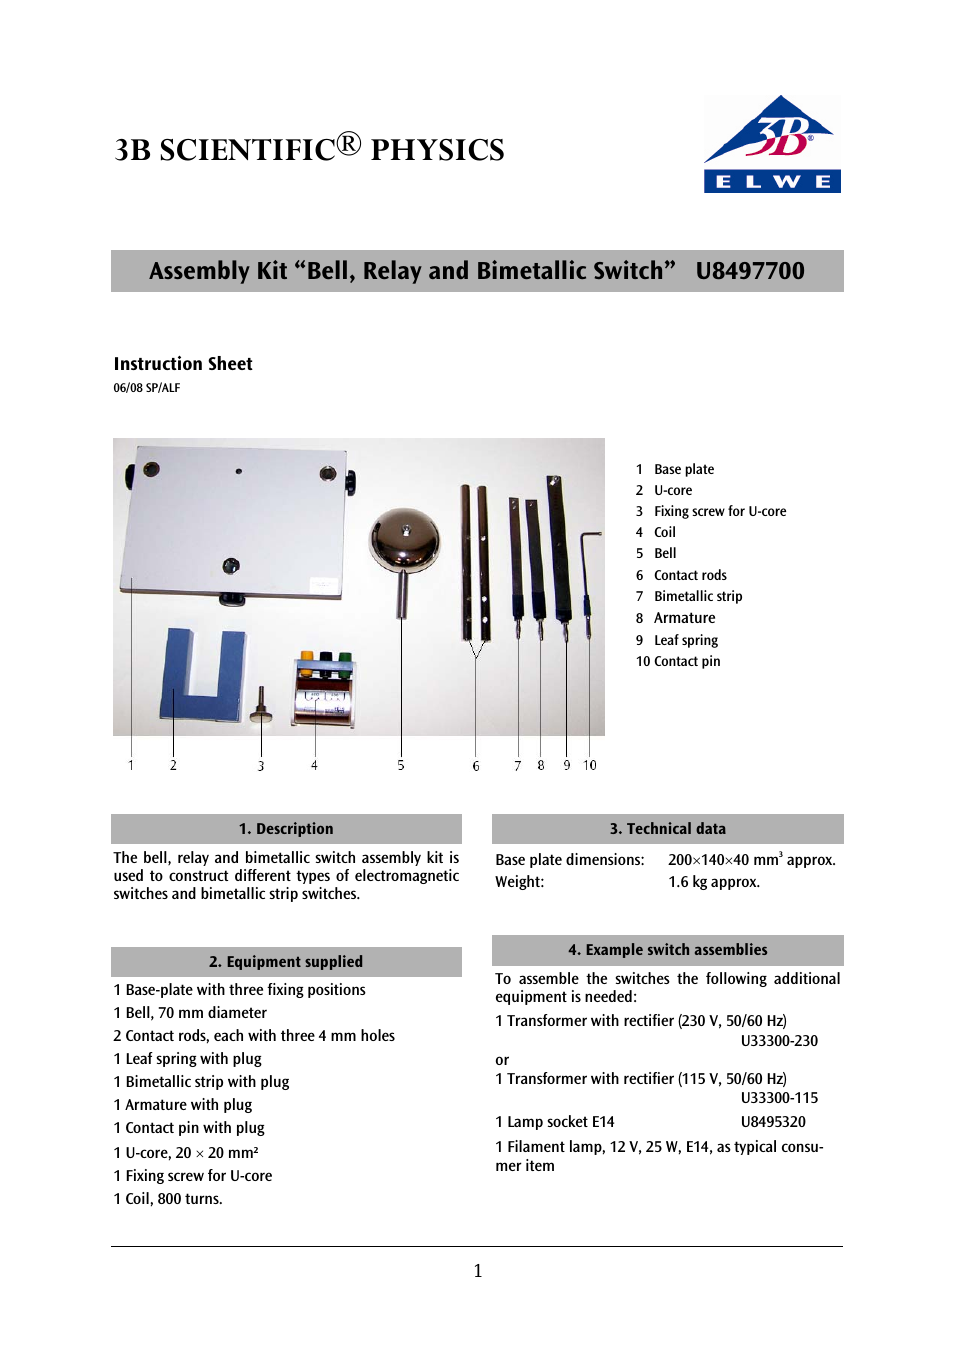 Assembly Kit “Bell, Relay and Bimetallic Switch ”